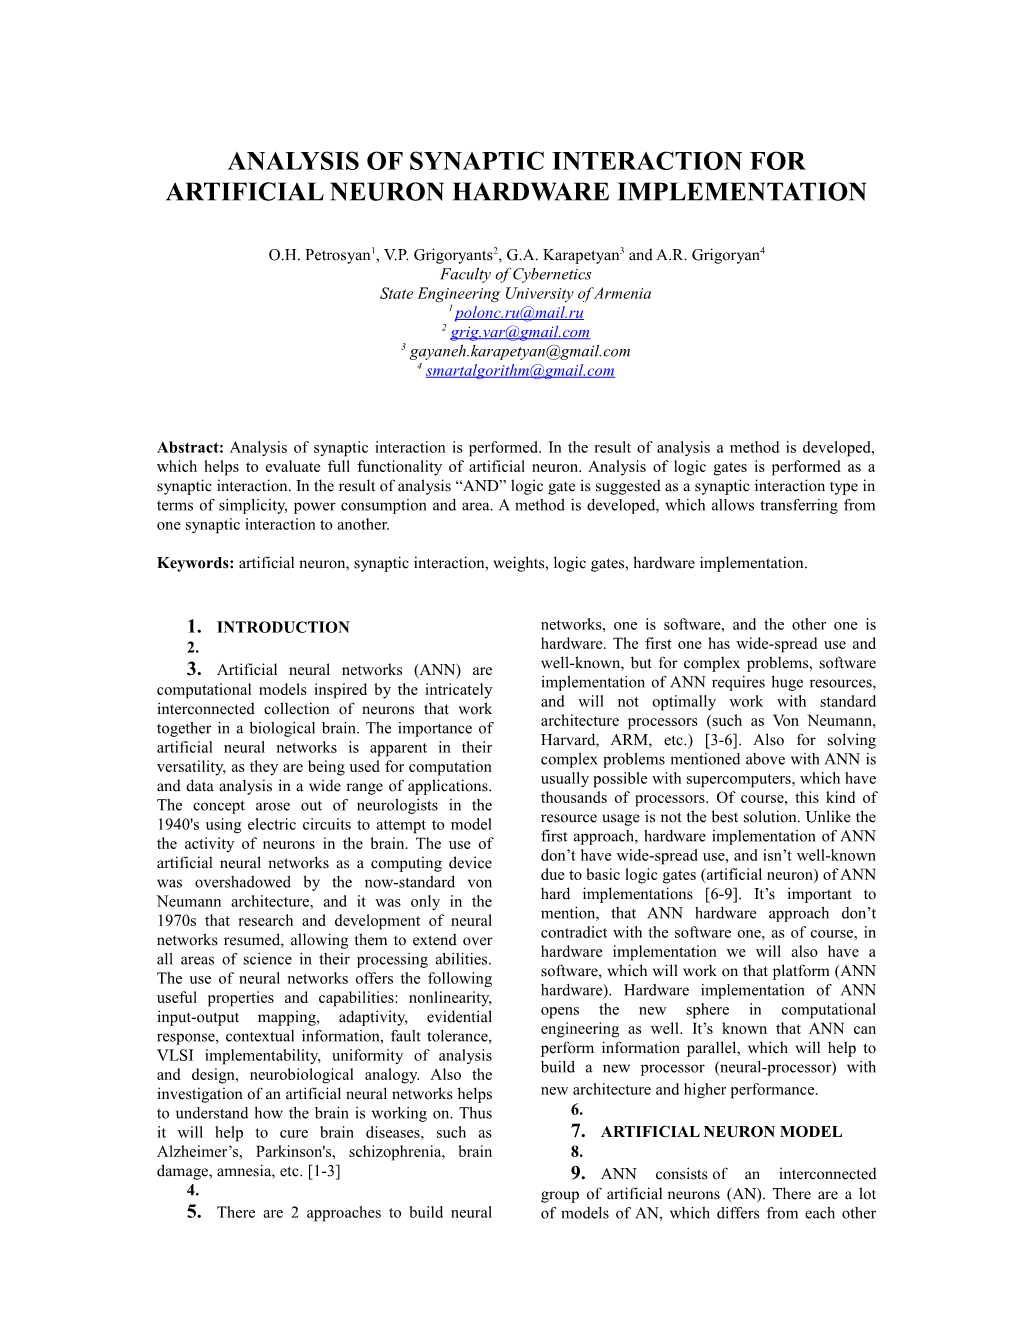 Analysis of Synaptic Interaction for Artificial Neuron Hardware Implementation